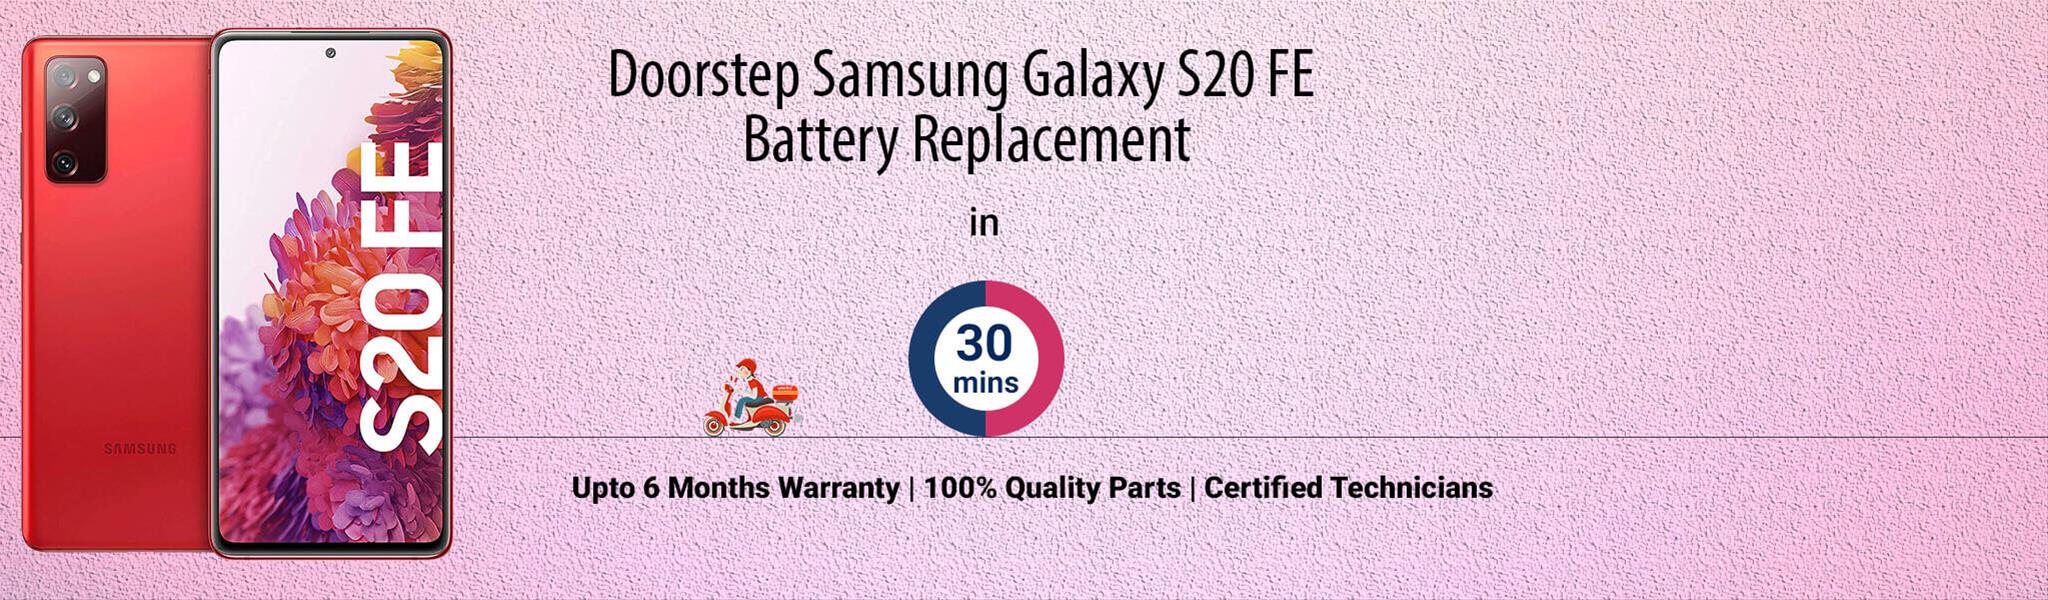 samsung-galaxy-s20-fe-battery-replacement.jpg